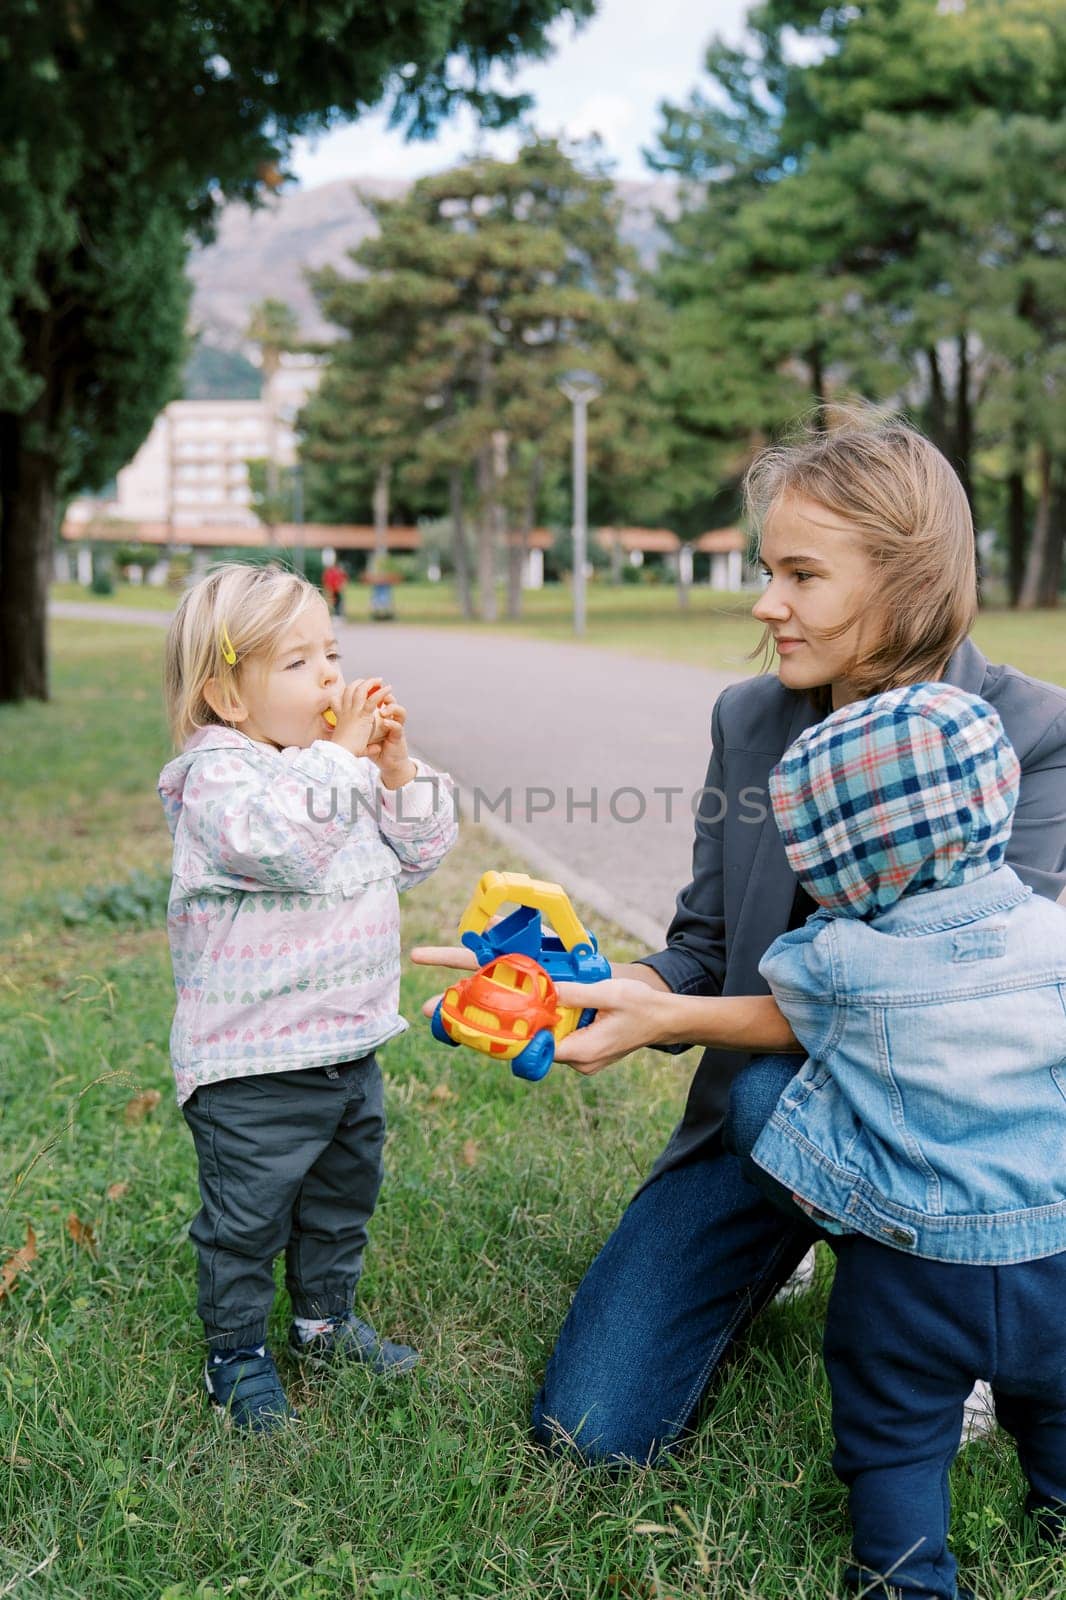 Small boy stands near his mother holding out toy cars to a little girl. High quality photo